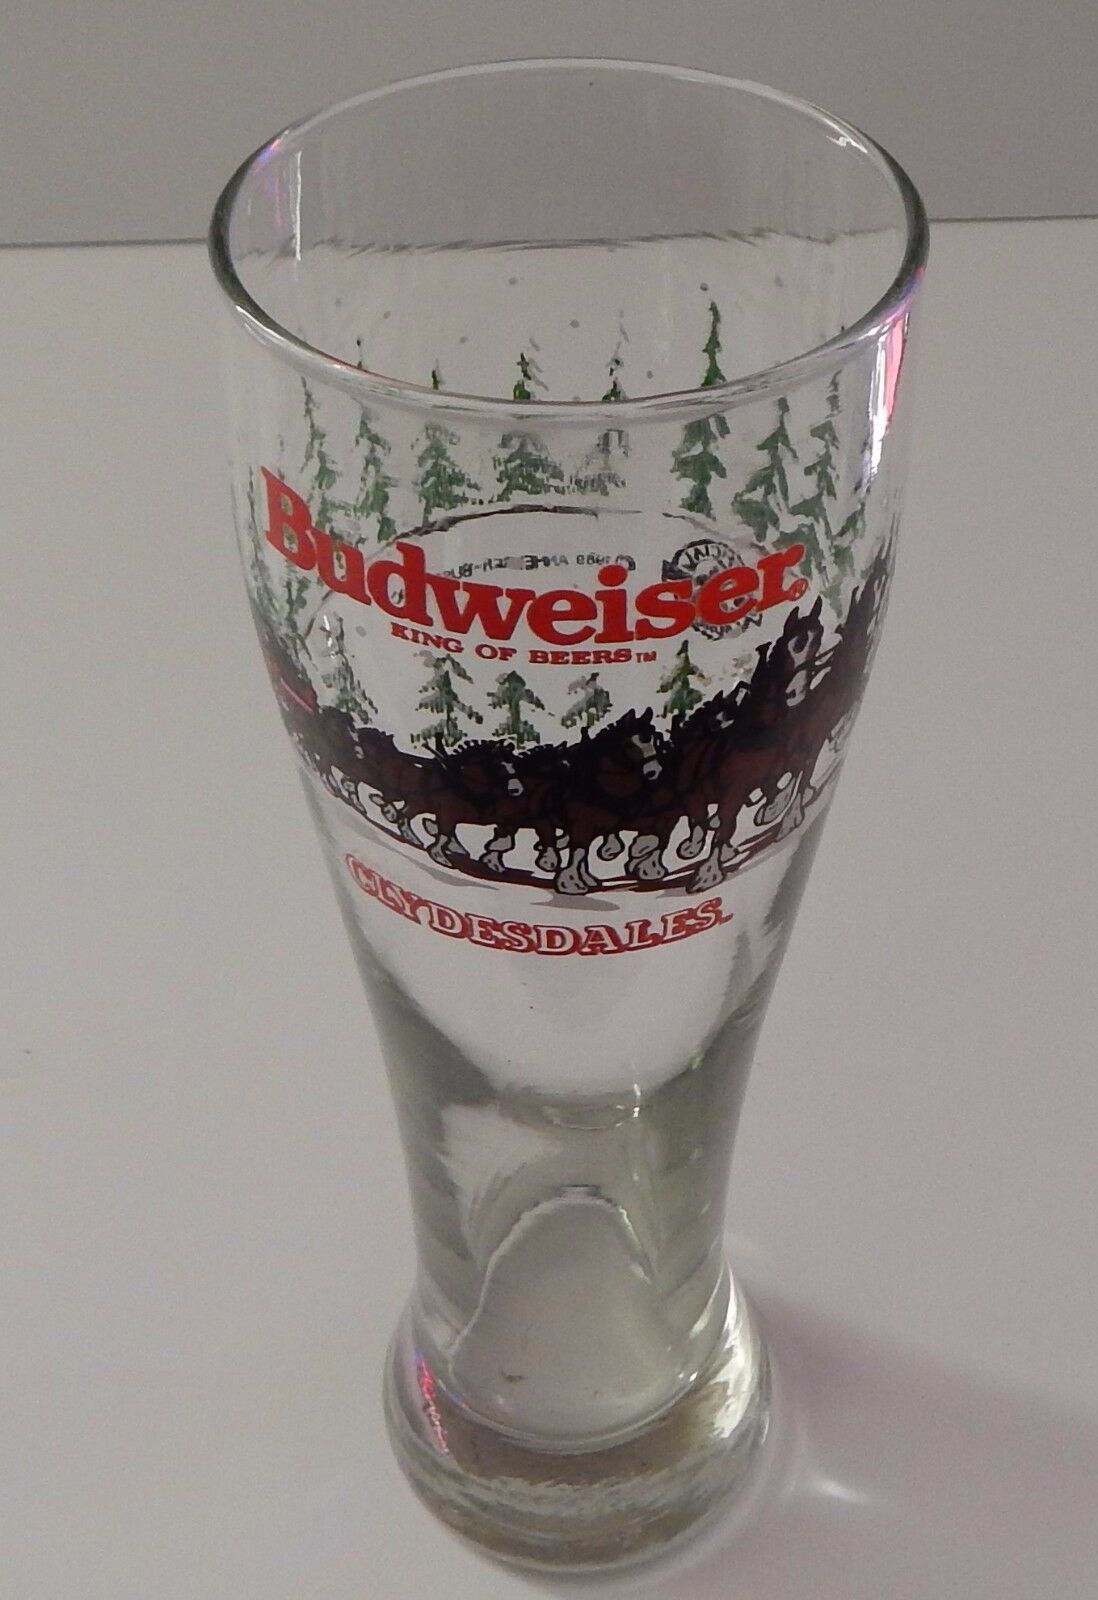 BUDWEISER King of Beers Tall Beer Glass Clydesdales Horses 12 oz